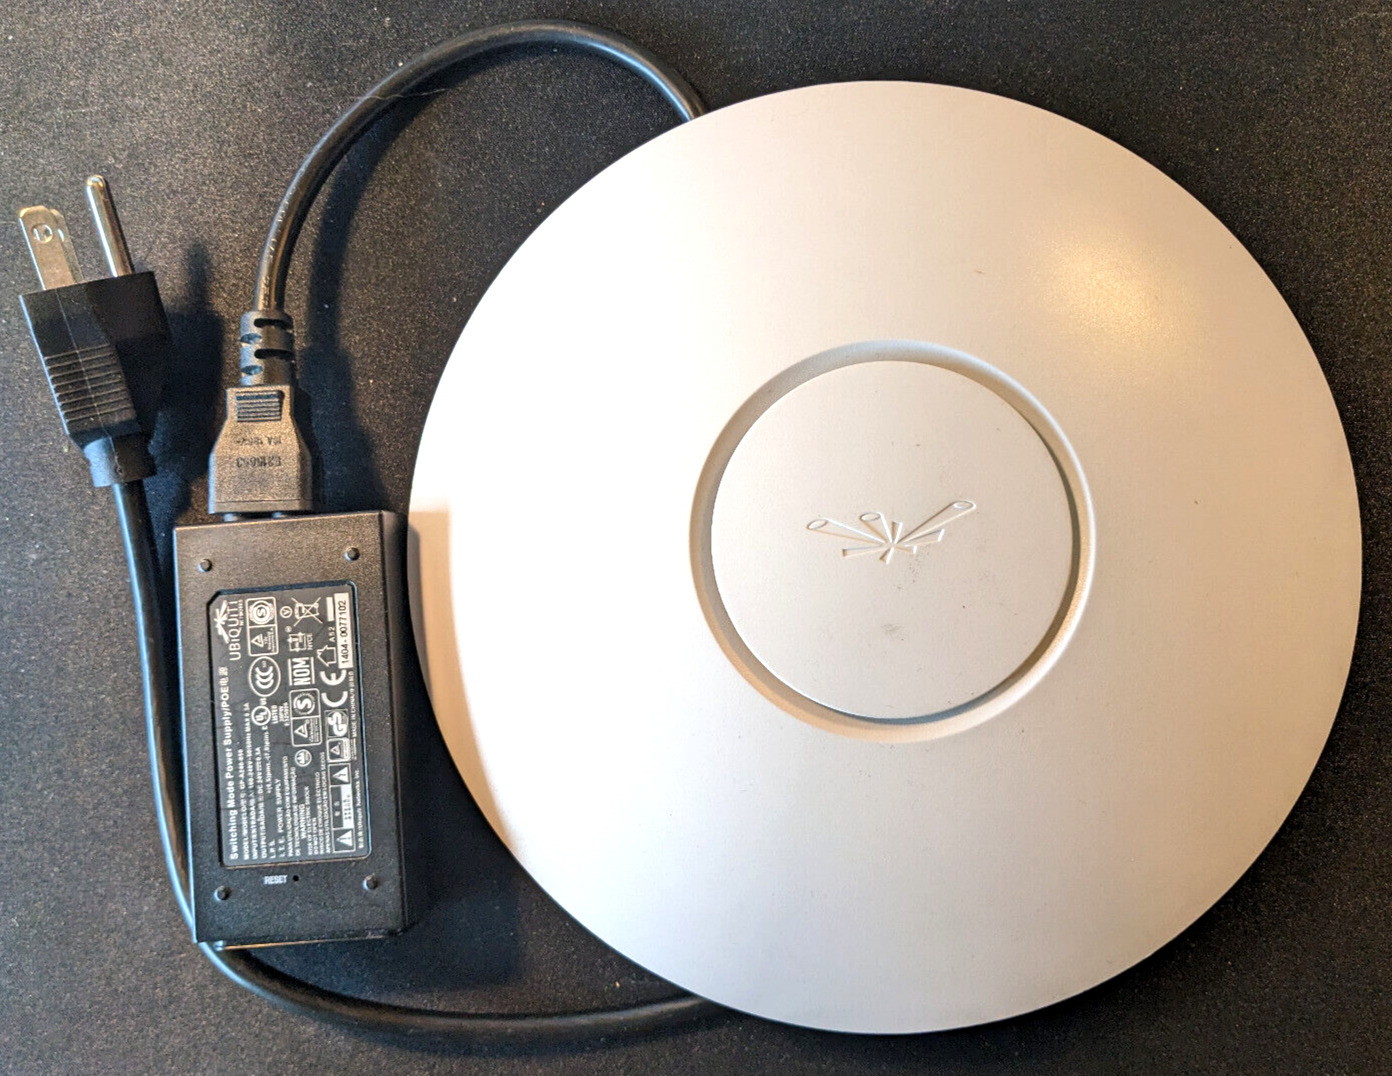 Ubiquiti Unifi UAP-LR Wifi Access Point with PoE adapter